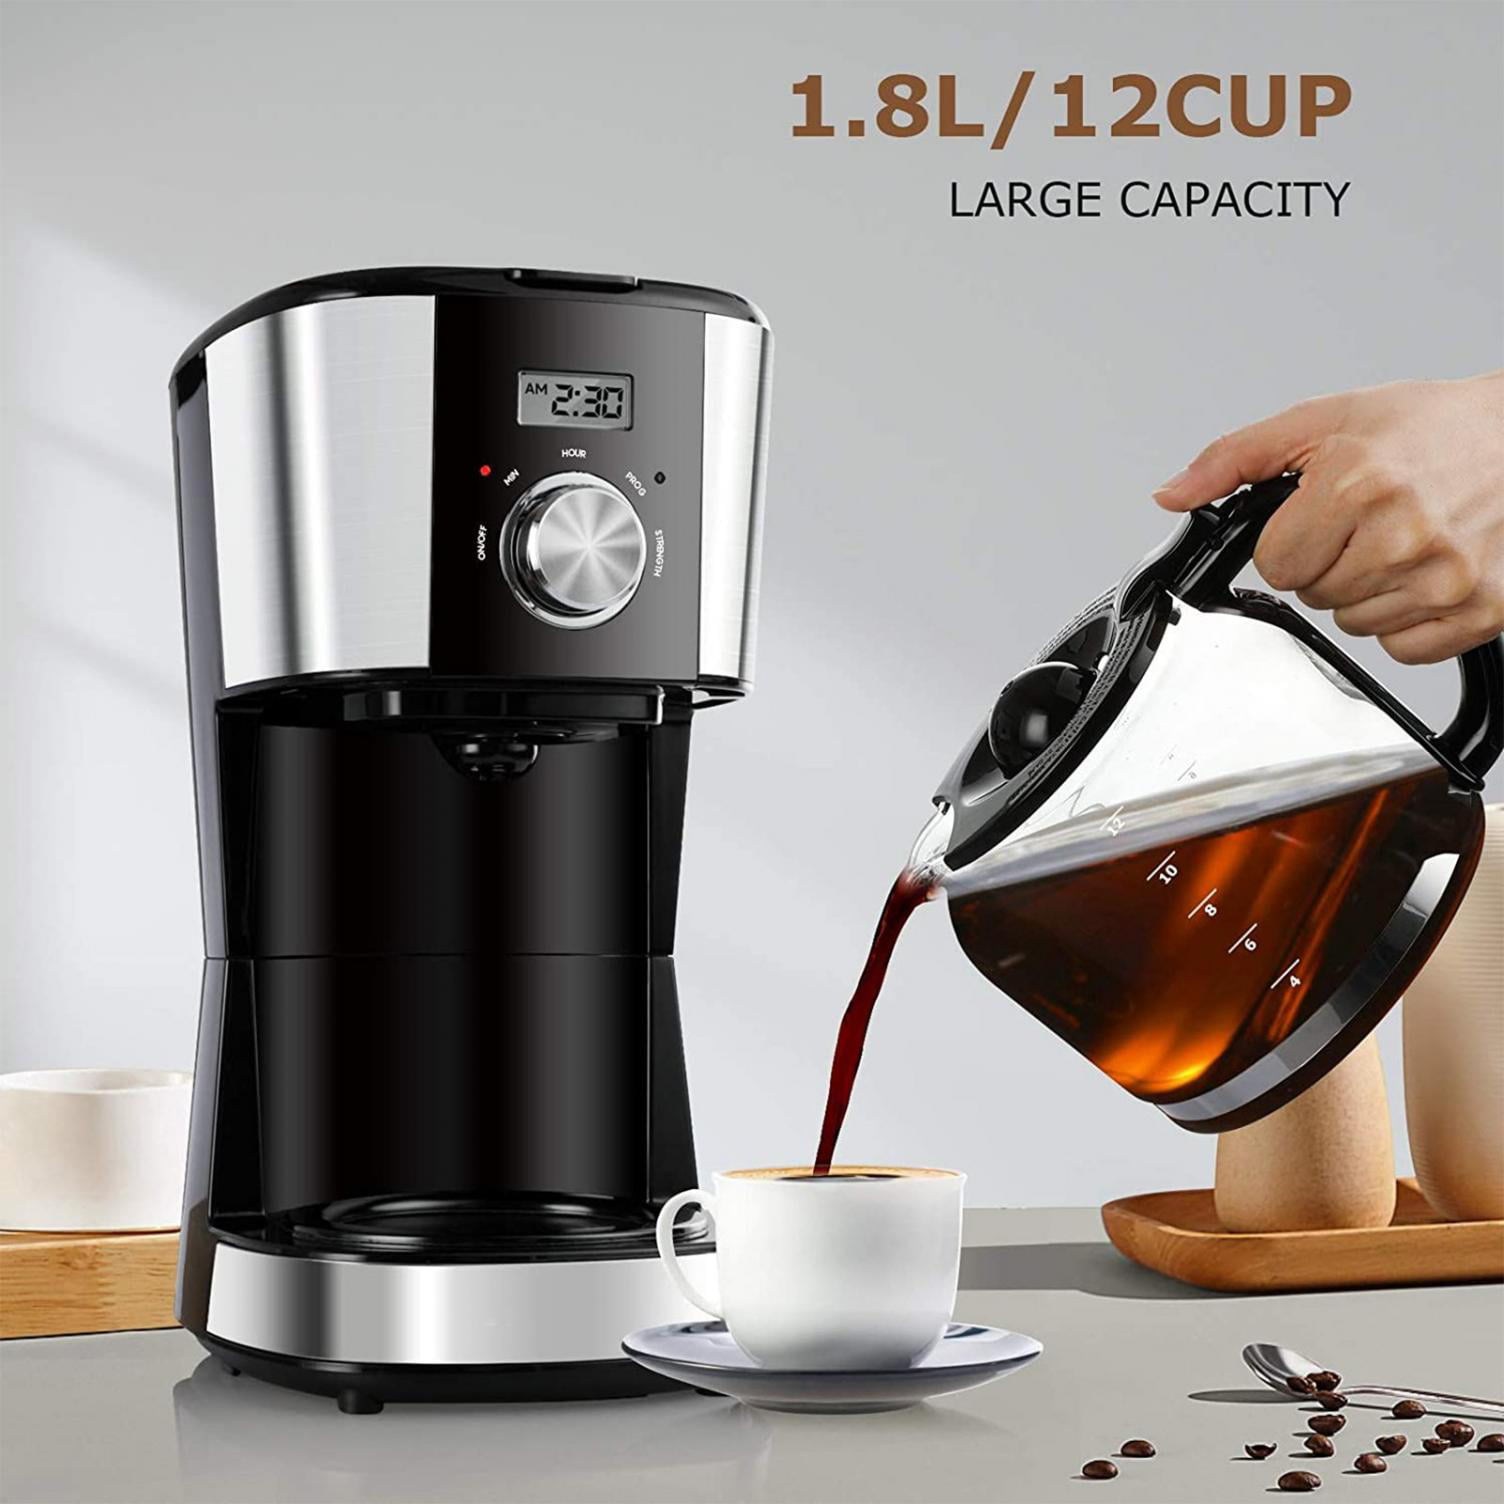 Less Than 1 Drip Per Second Details about   Scientific 1 Liter Ice Coffee Drip Brewer Kit 